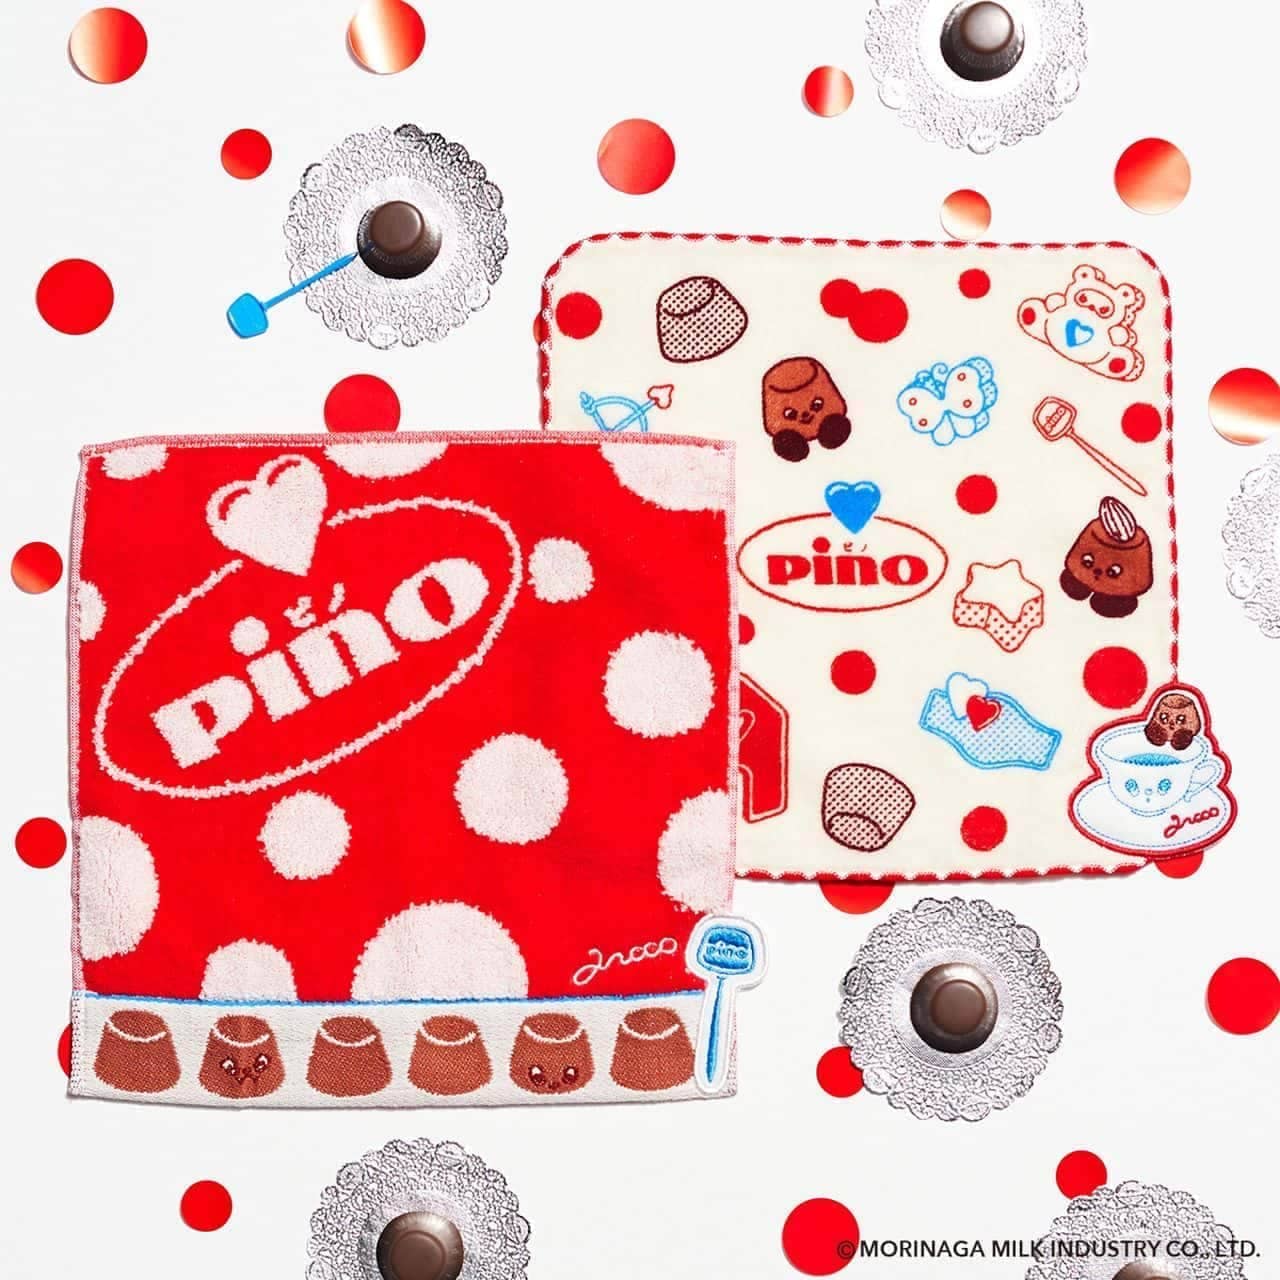 Afternoon Tea LIVING "Pino" collaboration items